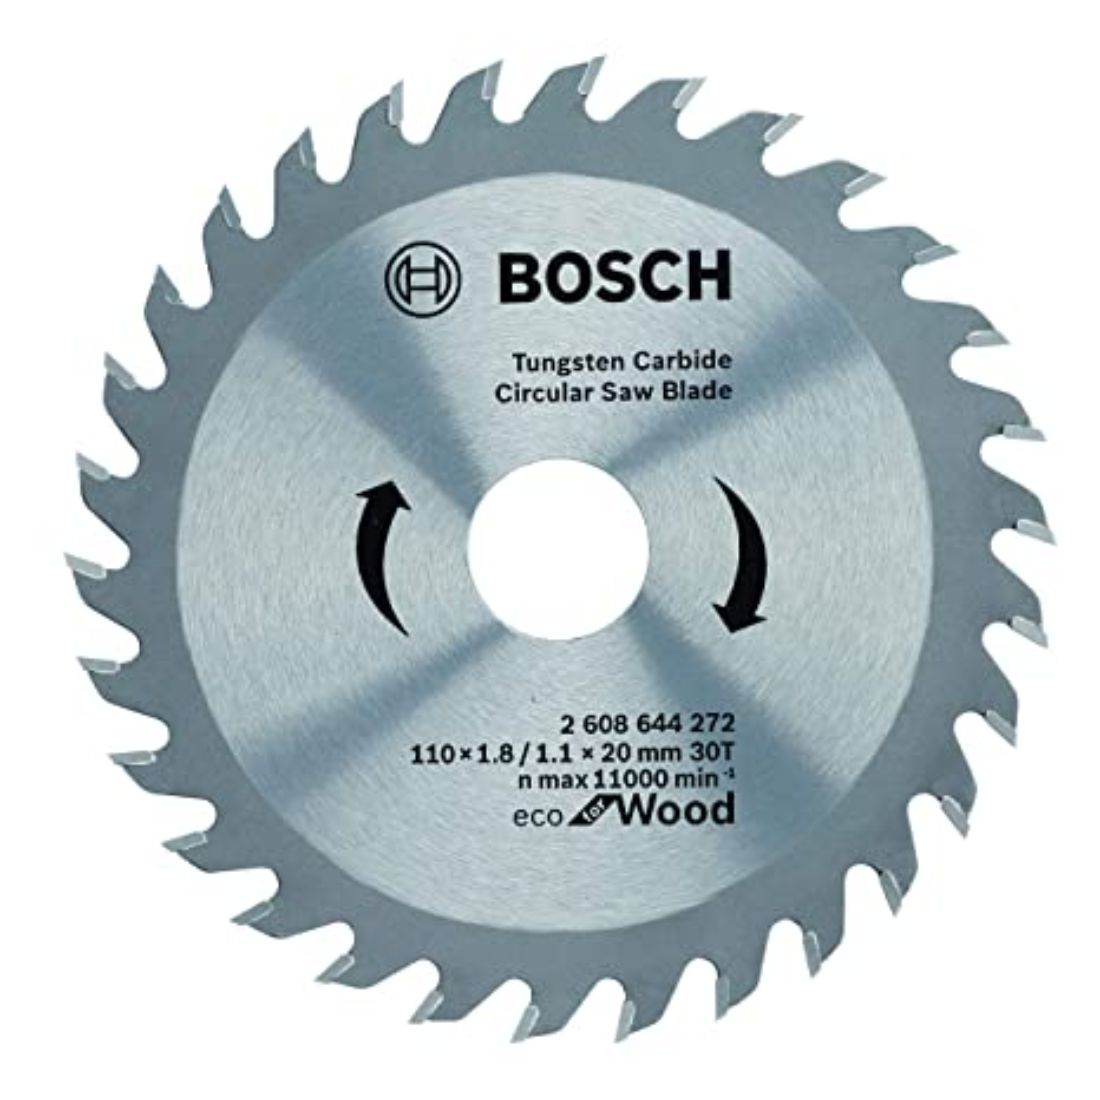 Bosch Professional Circular Saw Blade For Wood 5''/ 125Mm Dia, 20Mm Bore, 30 Teeth, Pack of 1